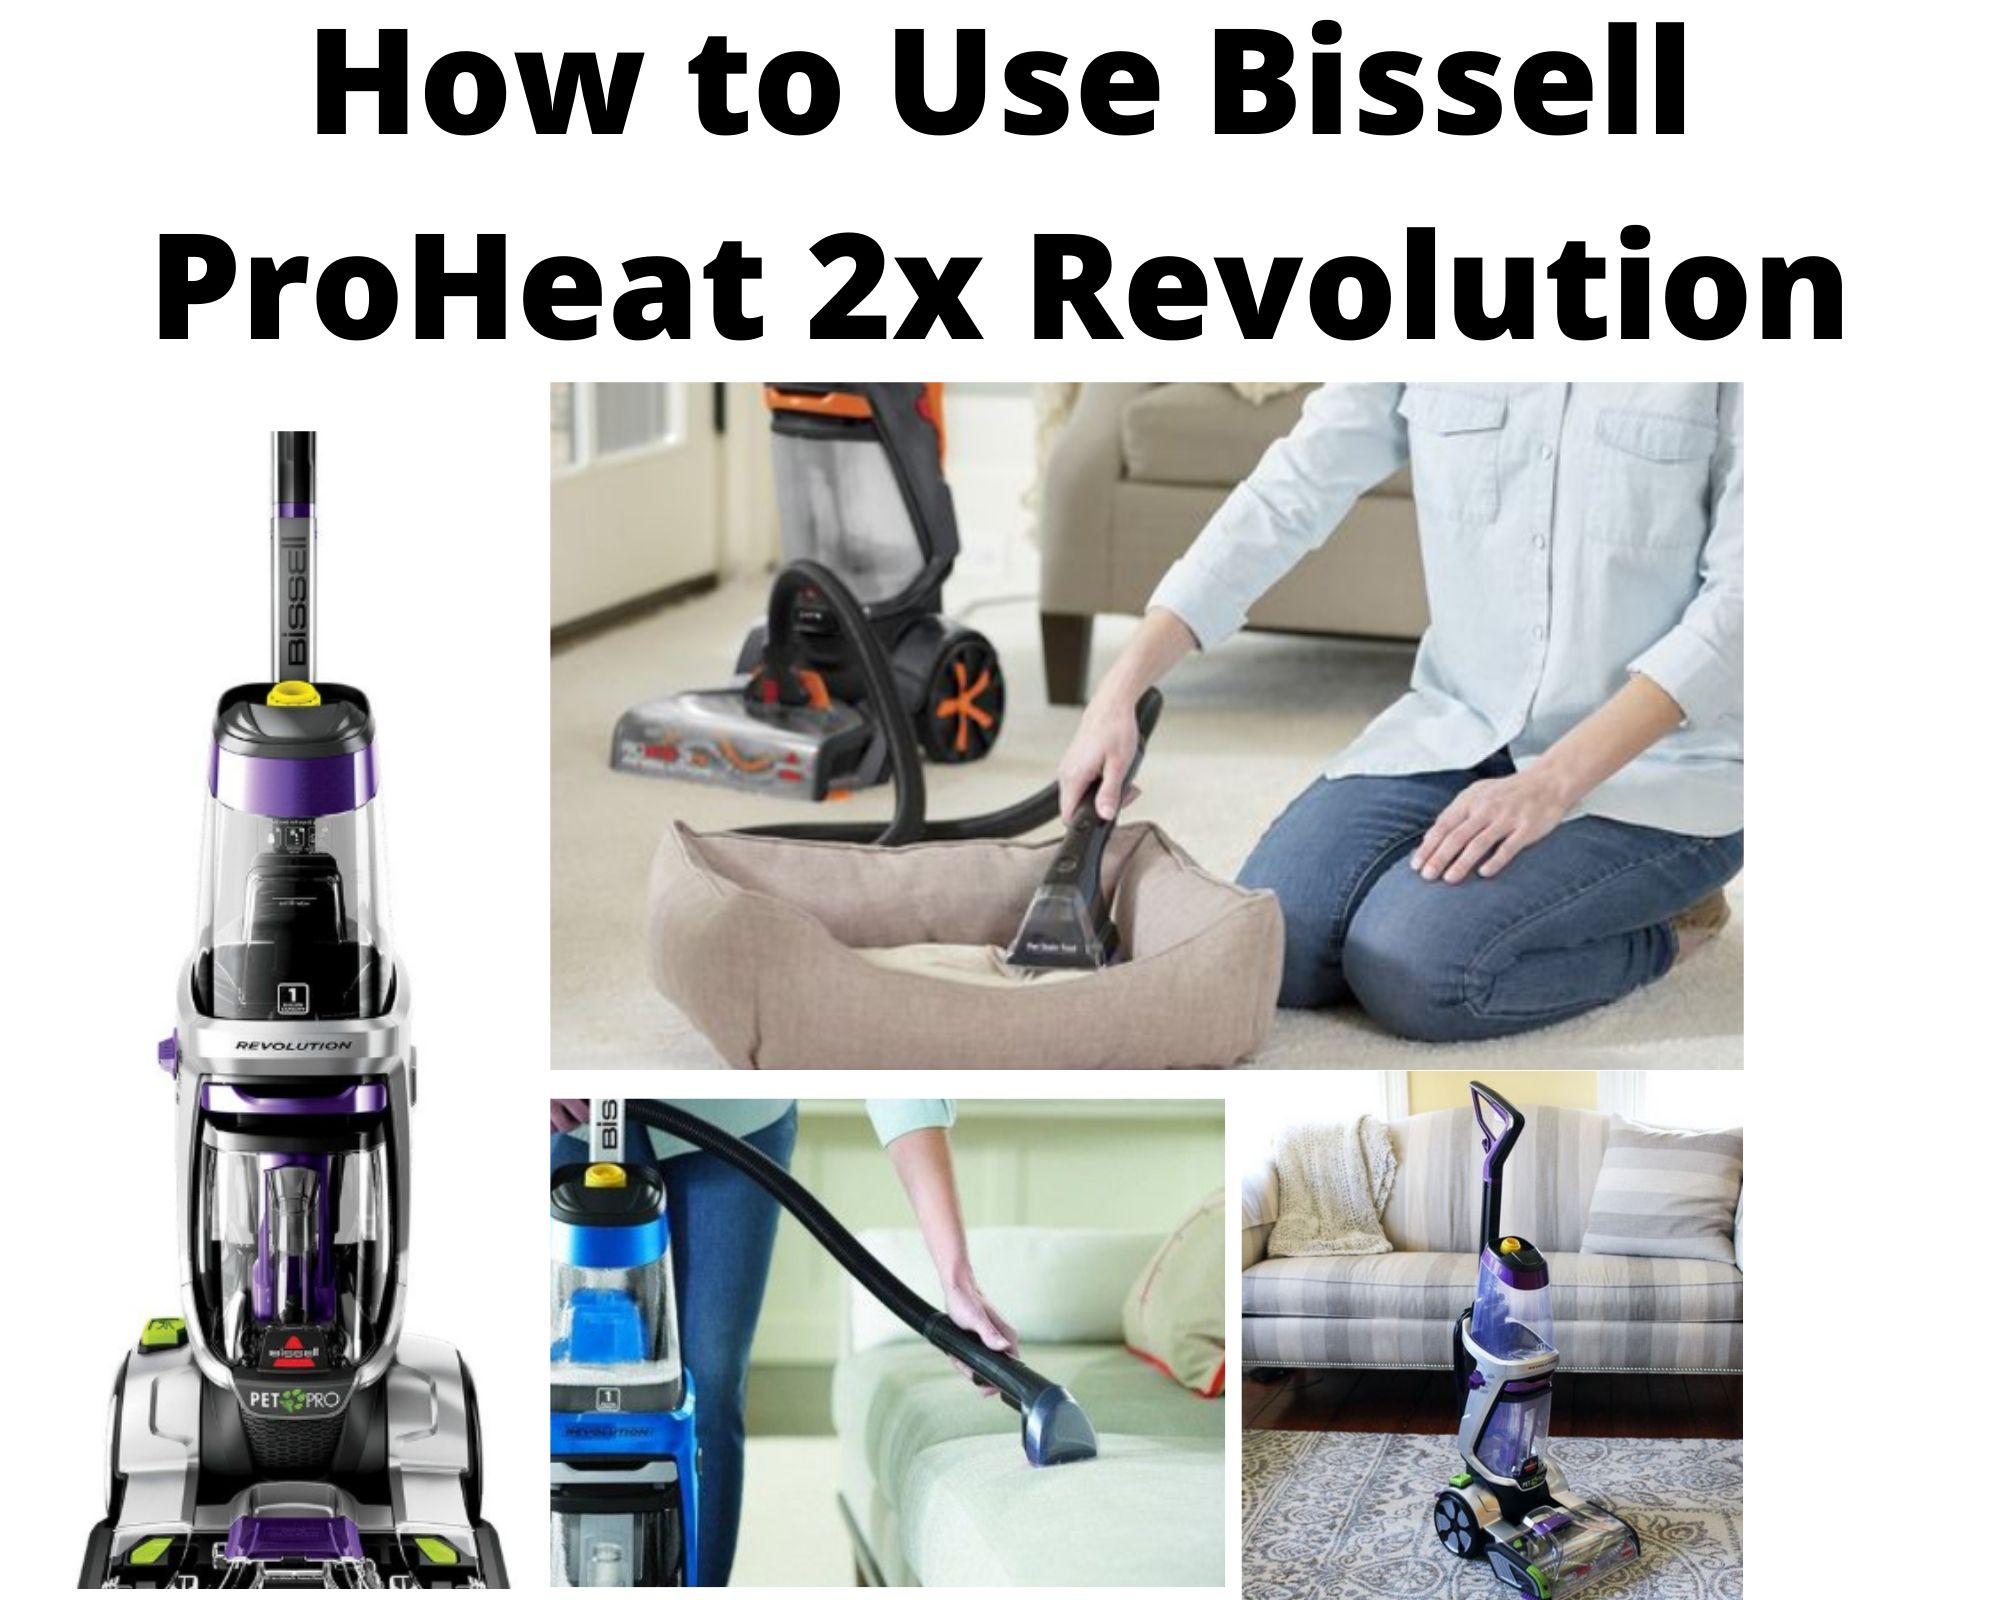 How to Use Bissell ProHeat 2x Revolution – 6 Steps To Follow